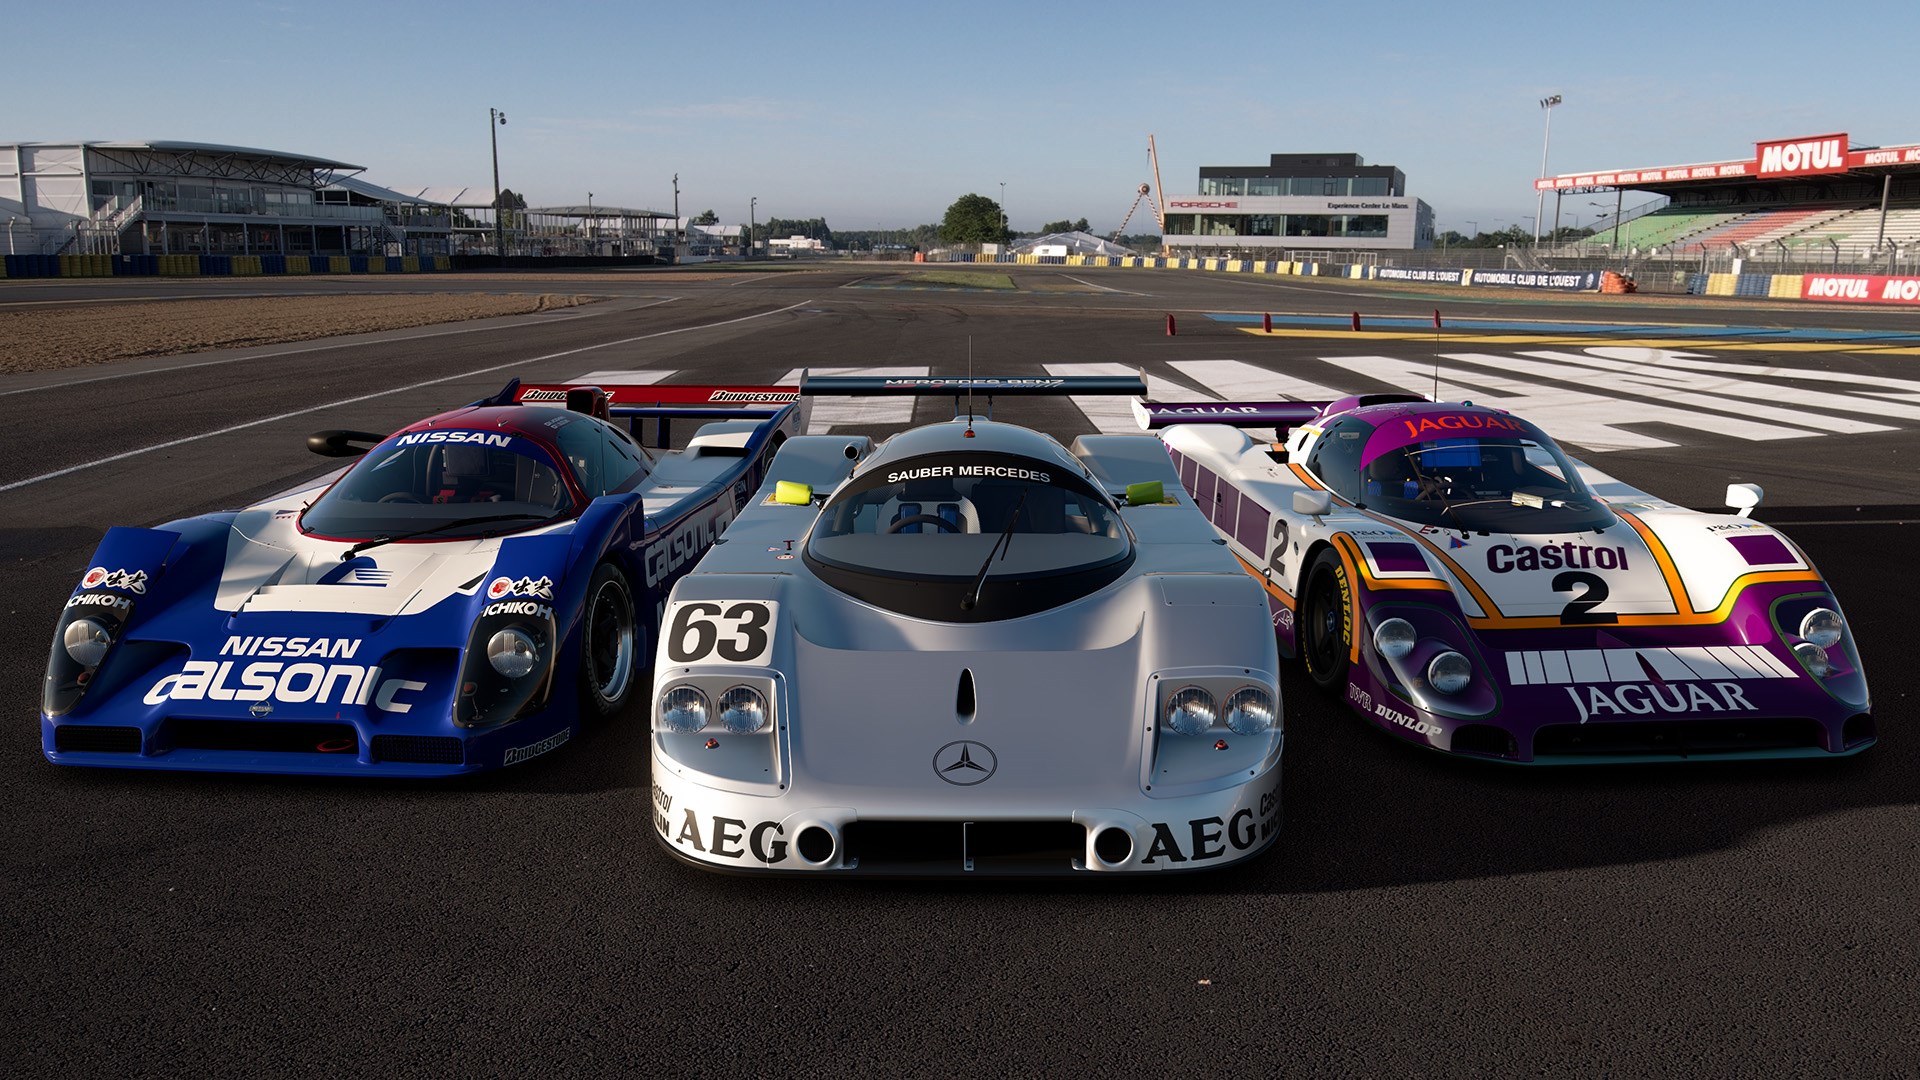 Best racing games 2019 on PS4 and Xbox One: the top 6 ...